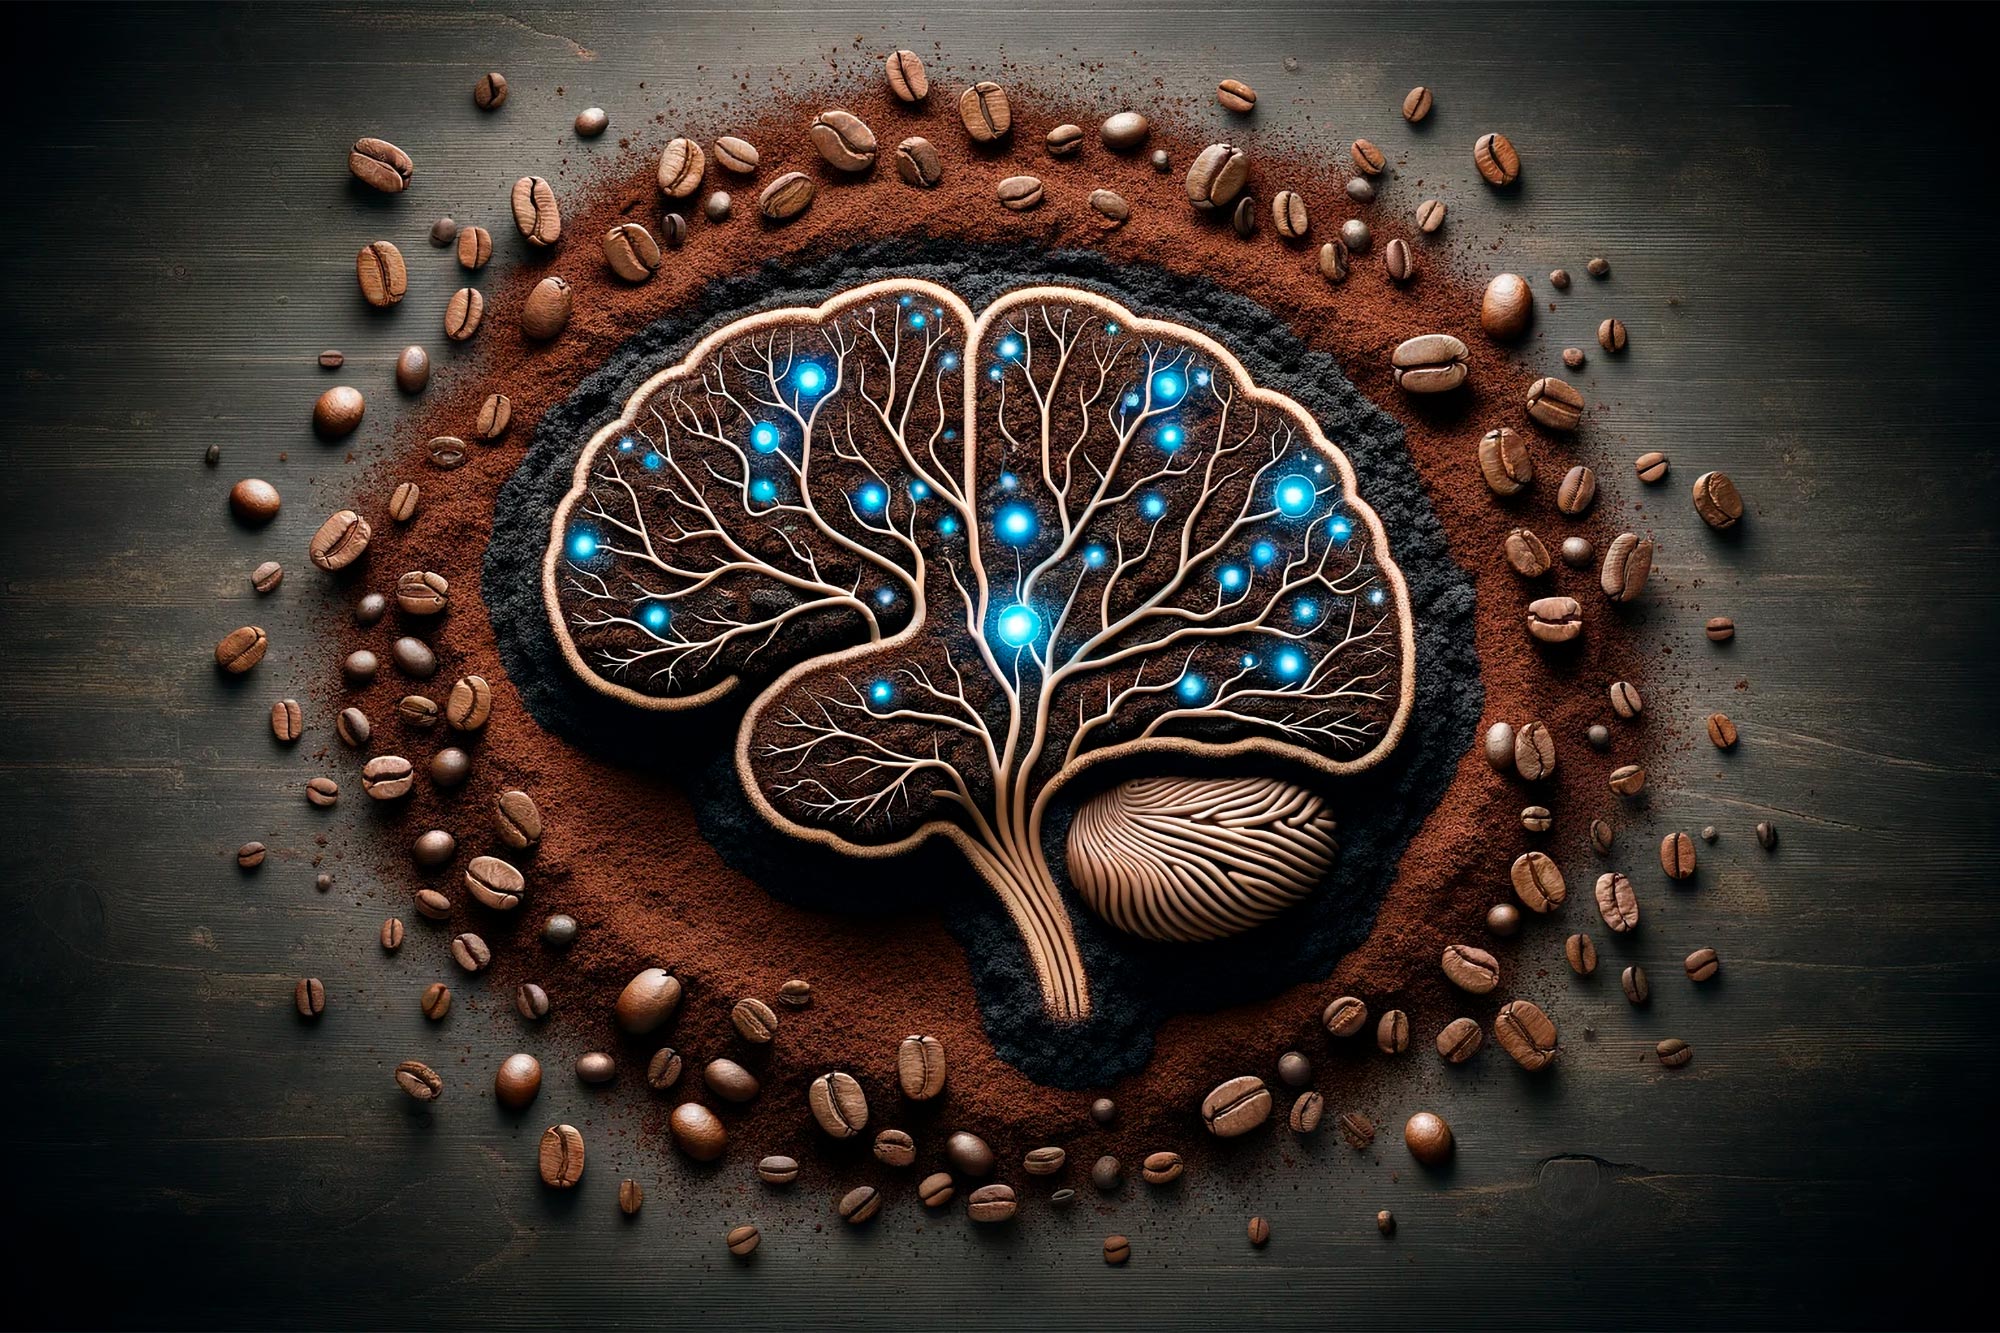 How Coffee Grounds Could Prevent Alzheimer’s, Parkinson’s, and Other Neurodegenerative Diseases